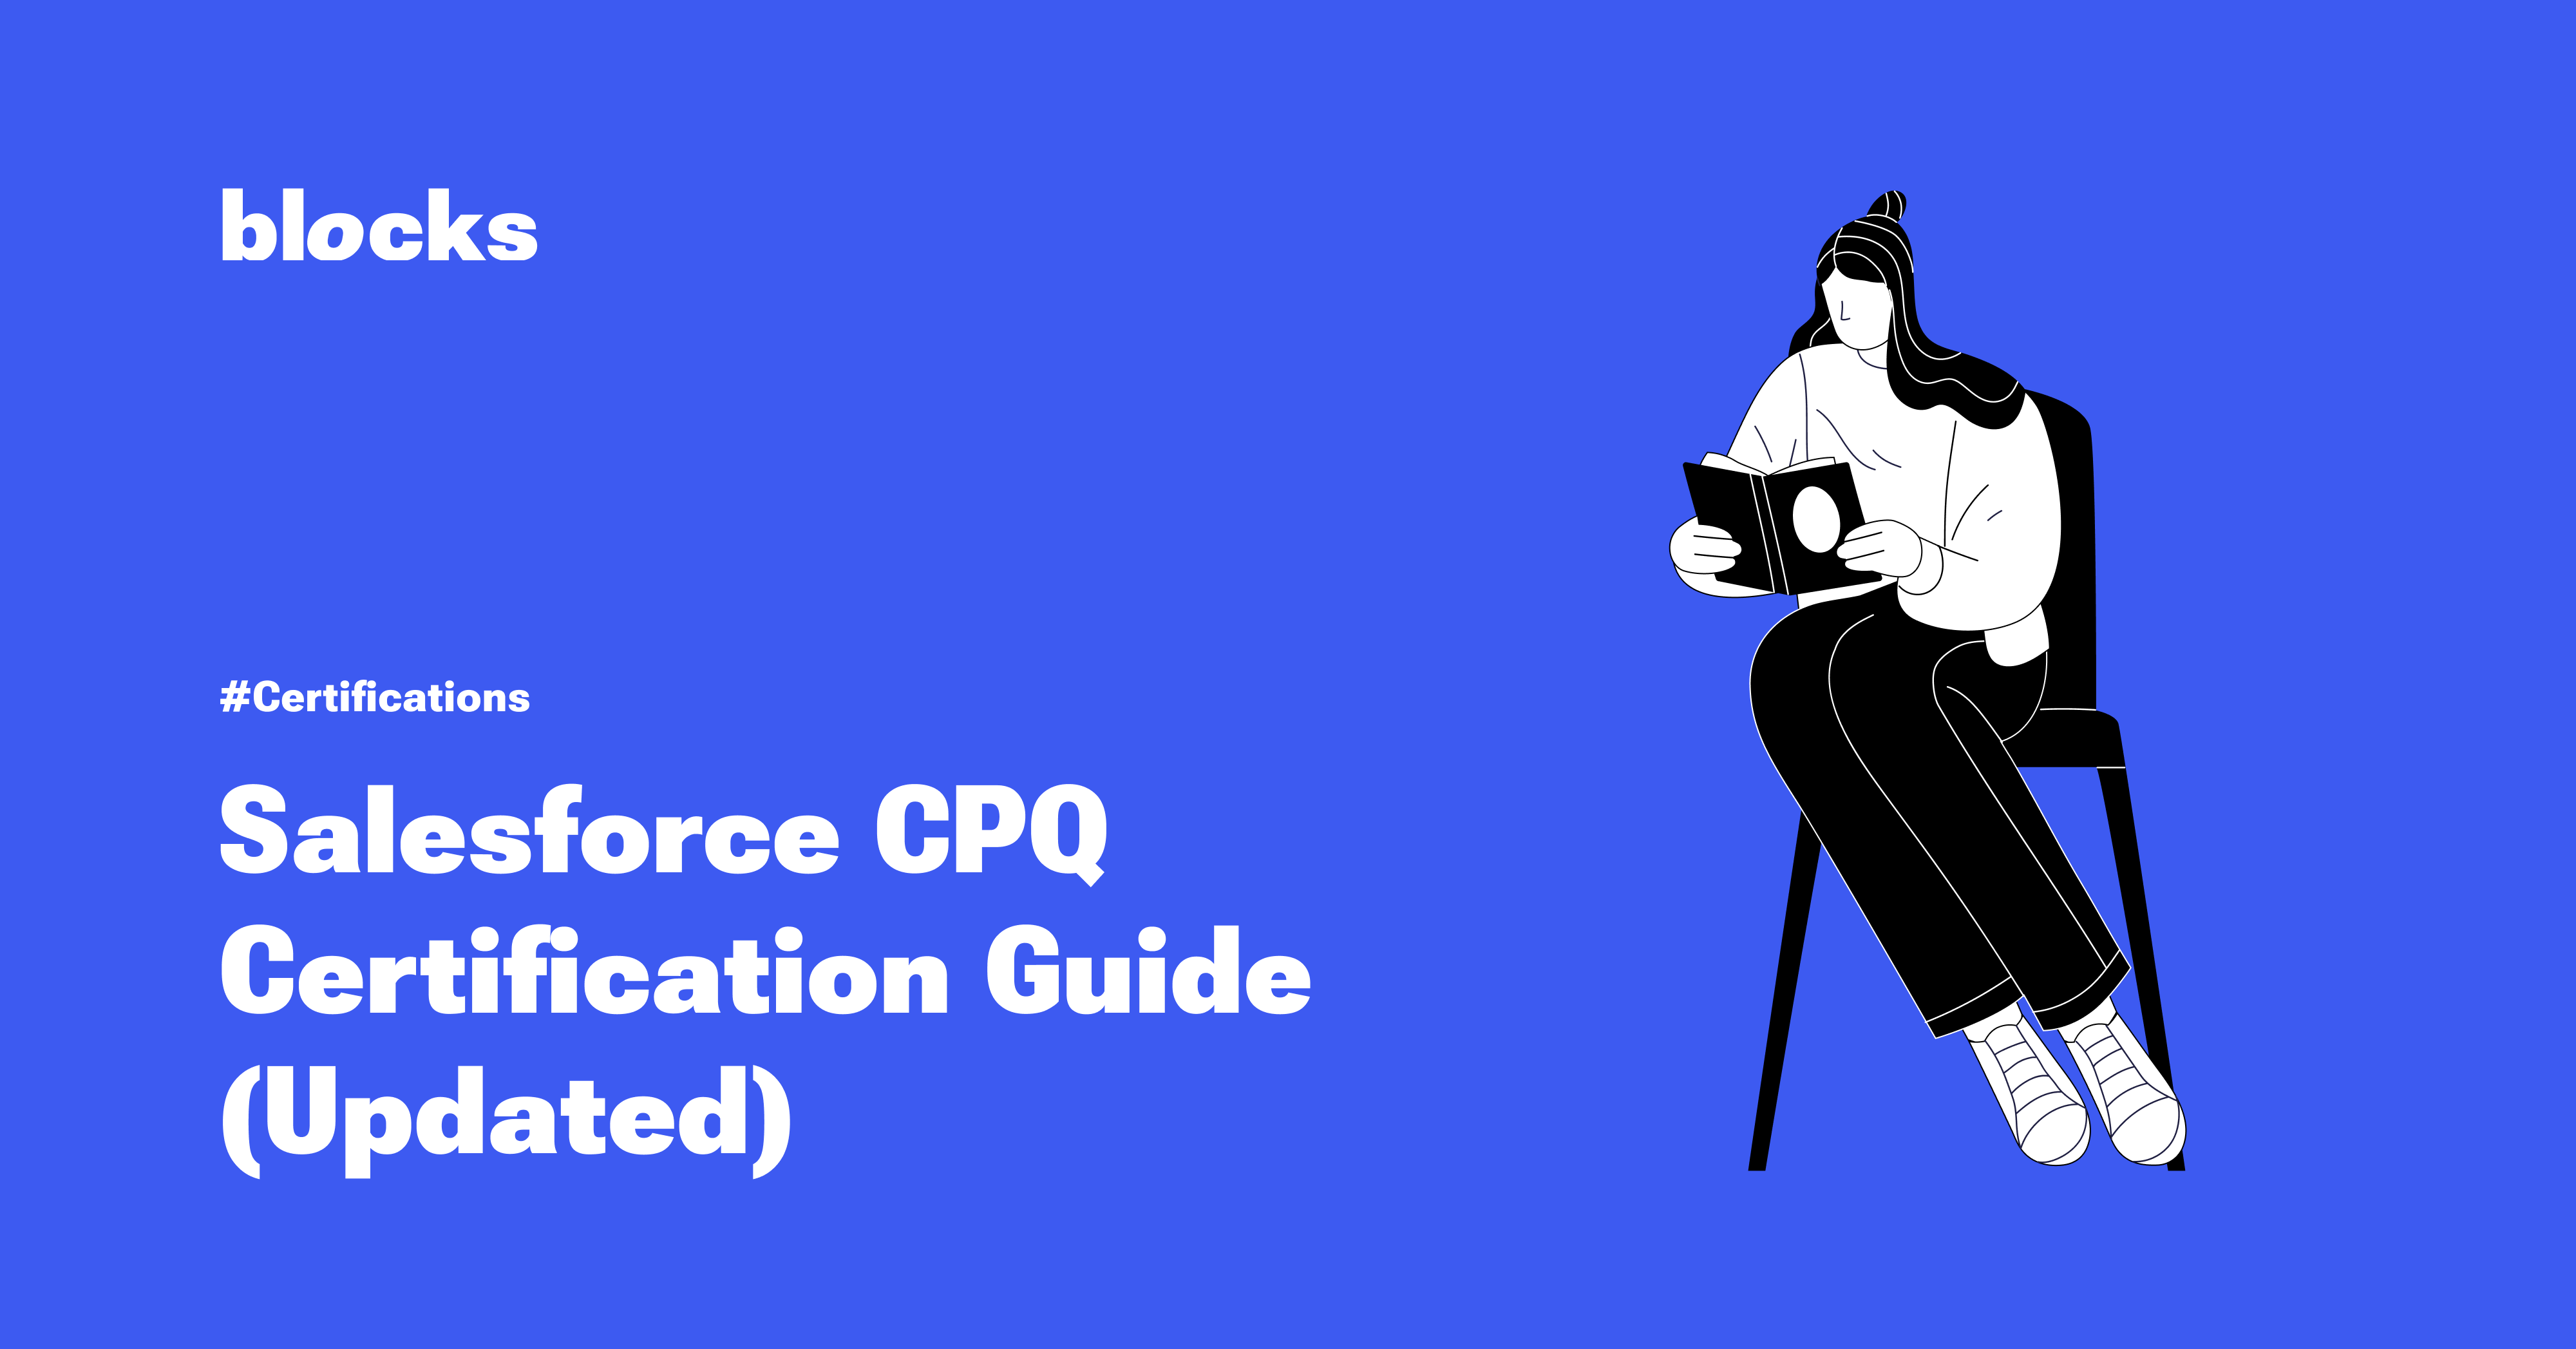 Salesforce CPQ Certification: From Requirements to Exam Mastery Blocks